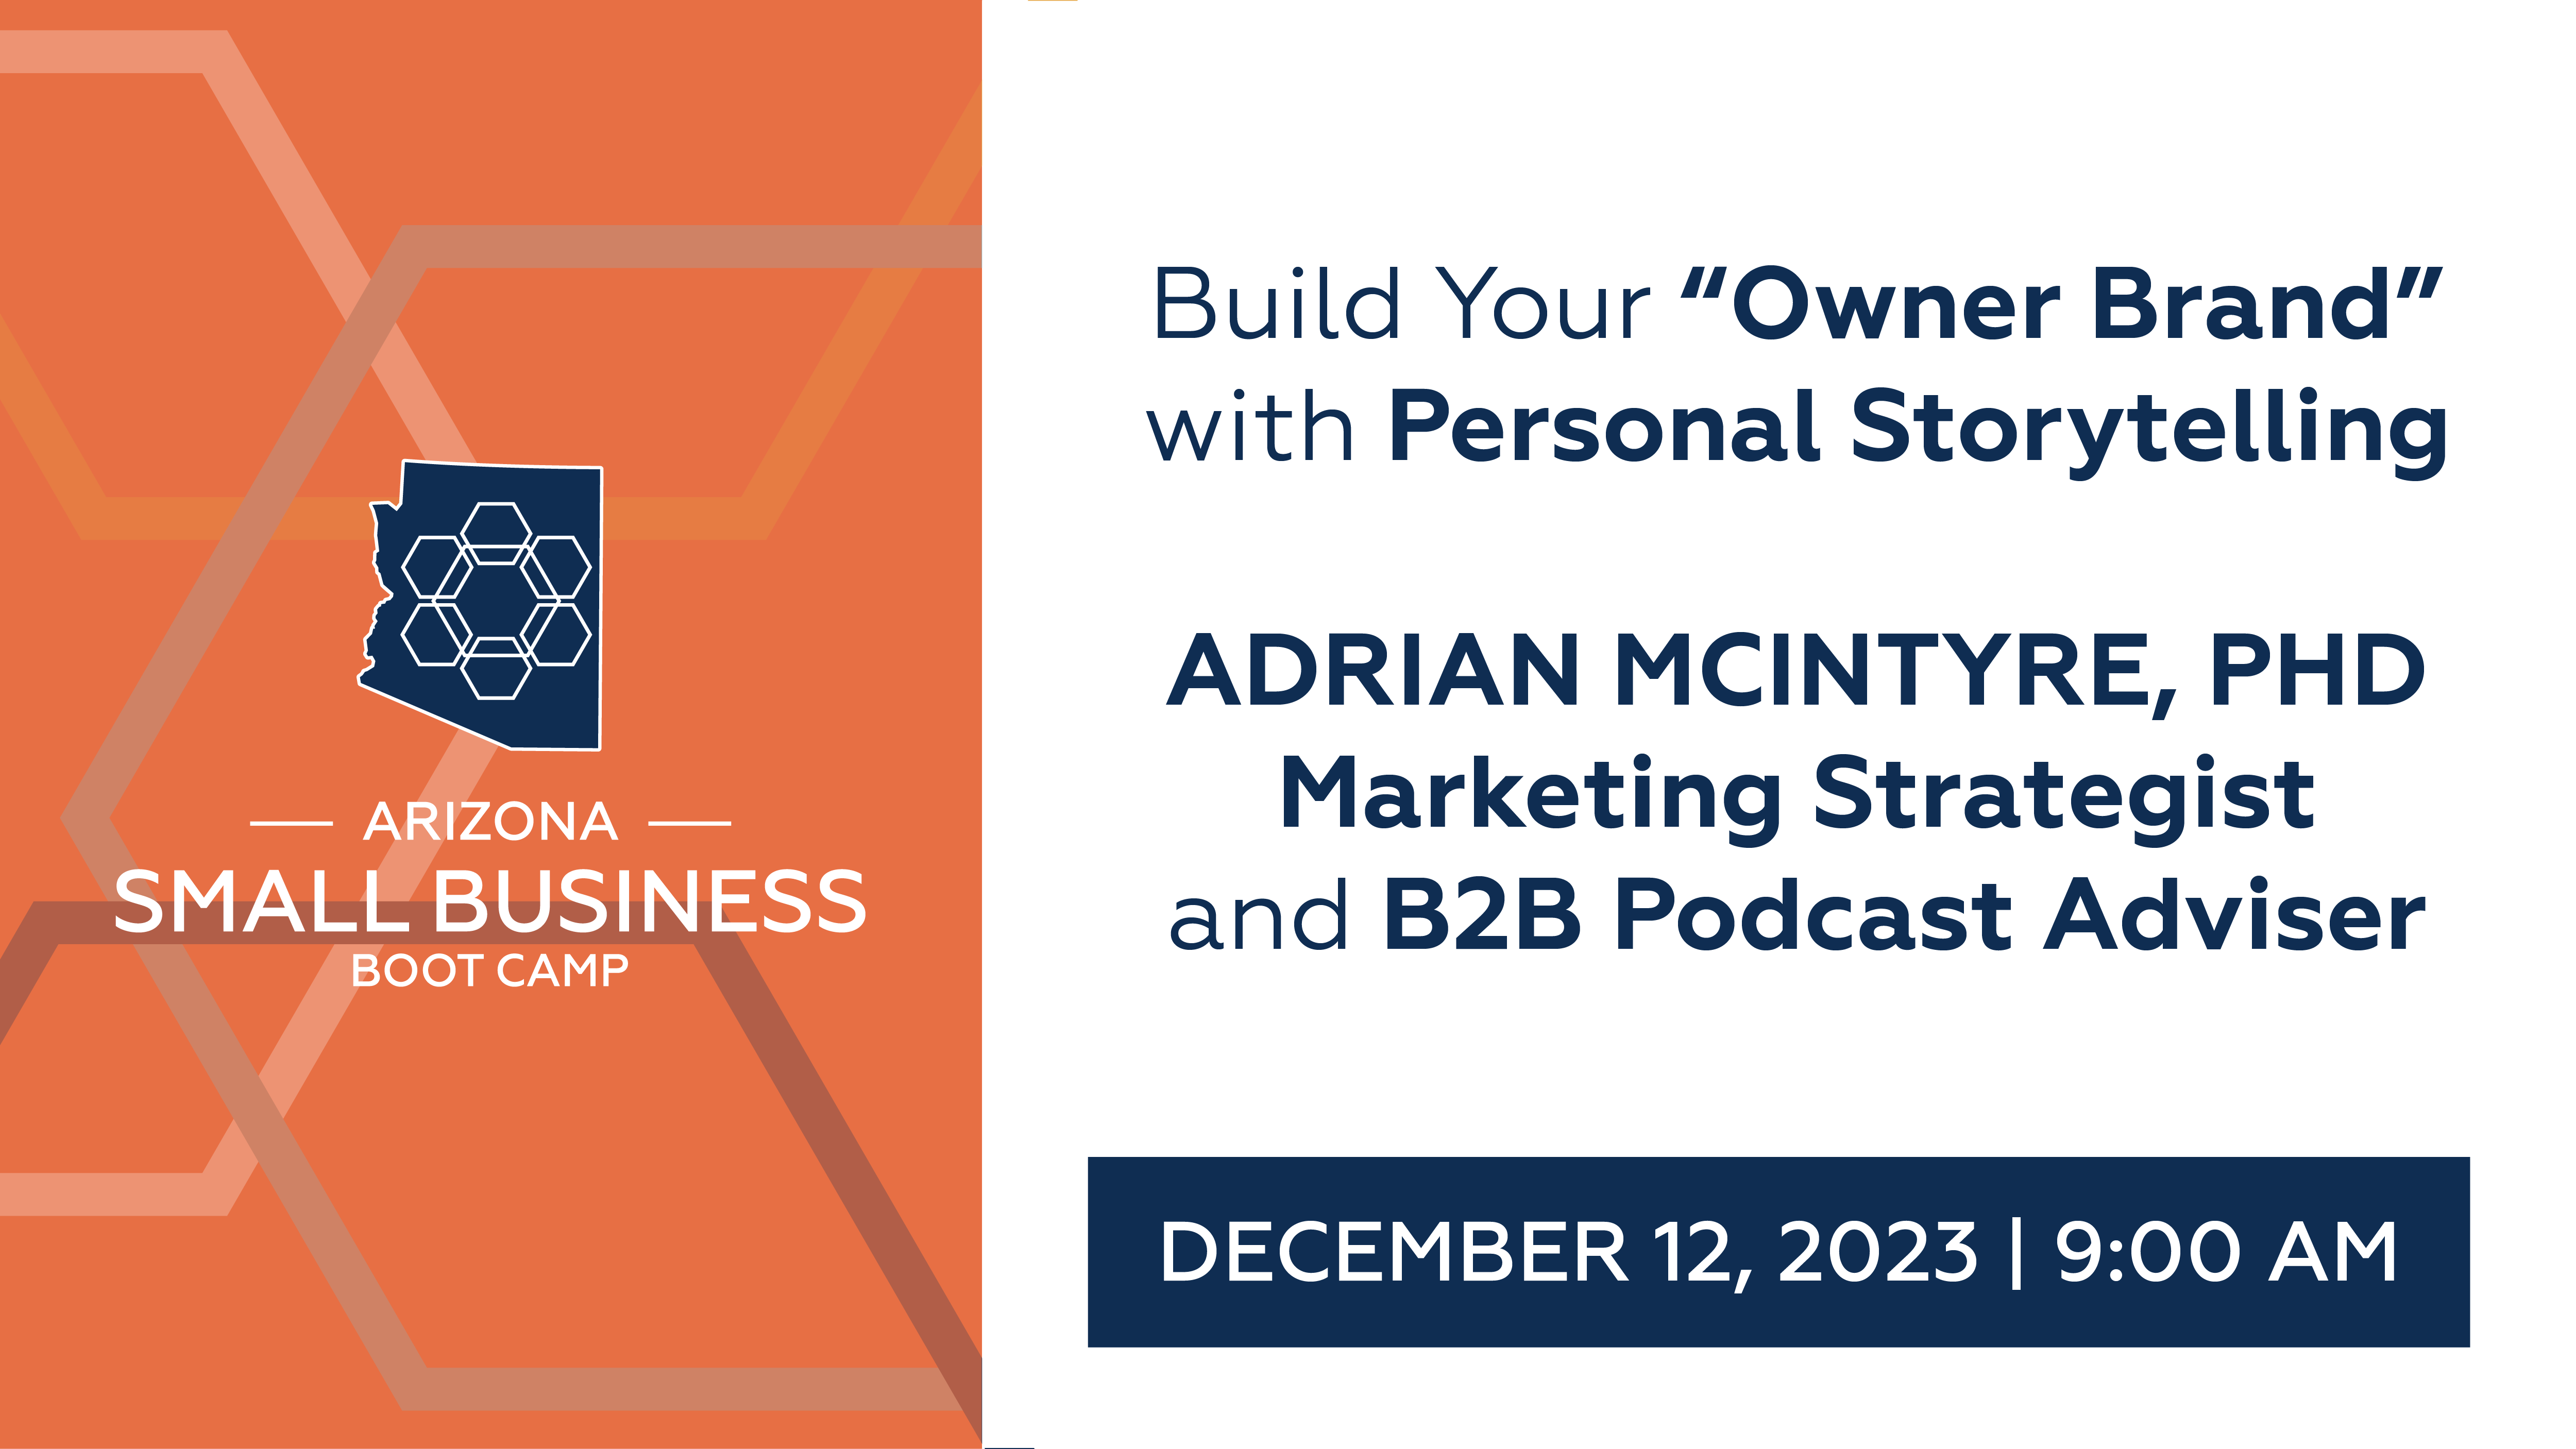 Build Your “Owner Brand” with Personal Storytelling